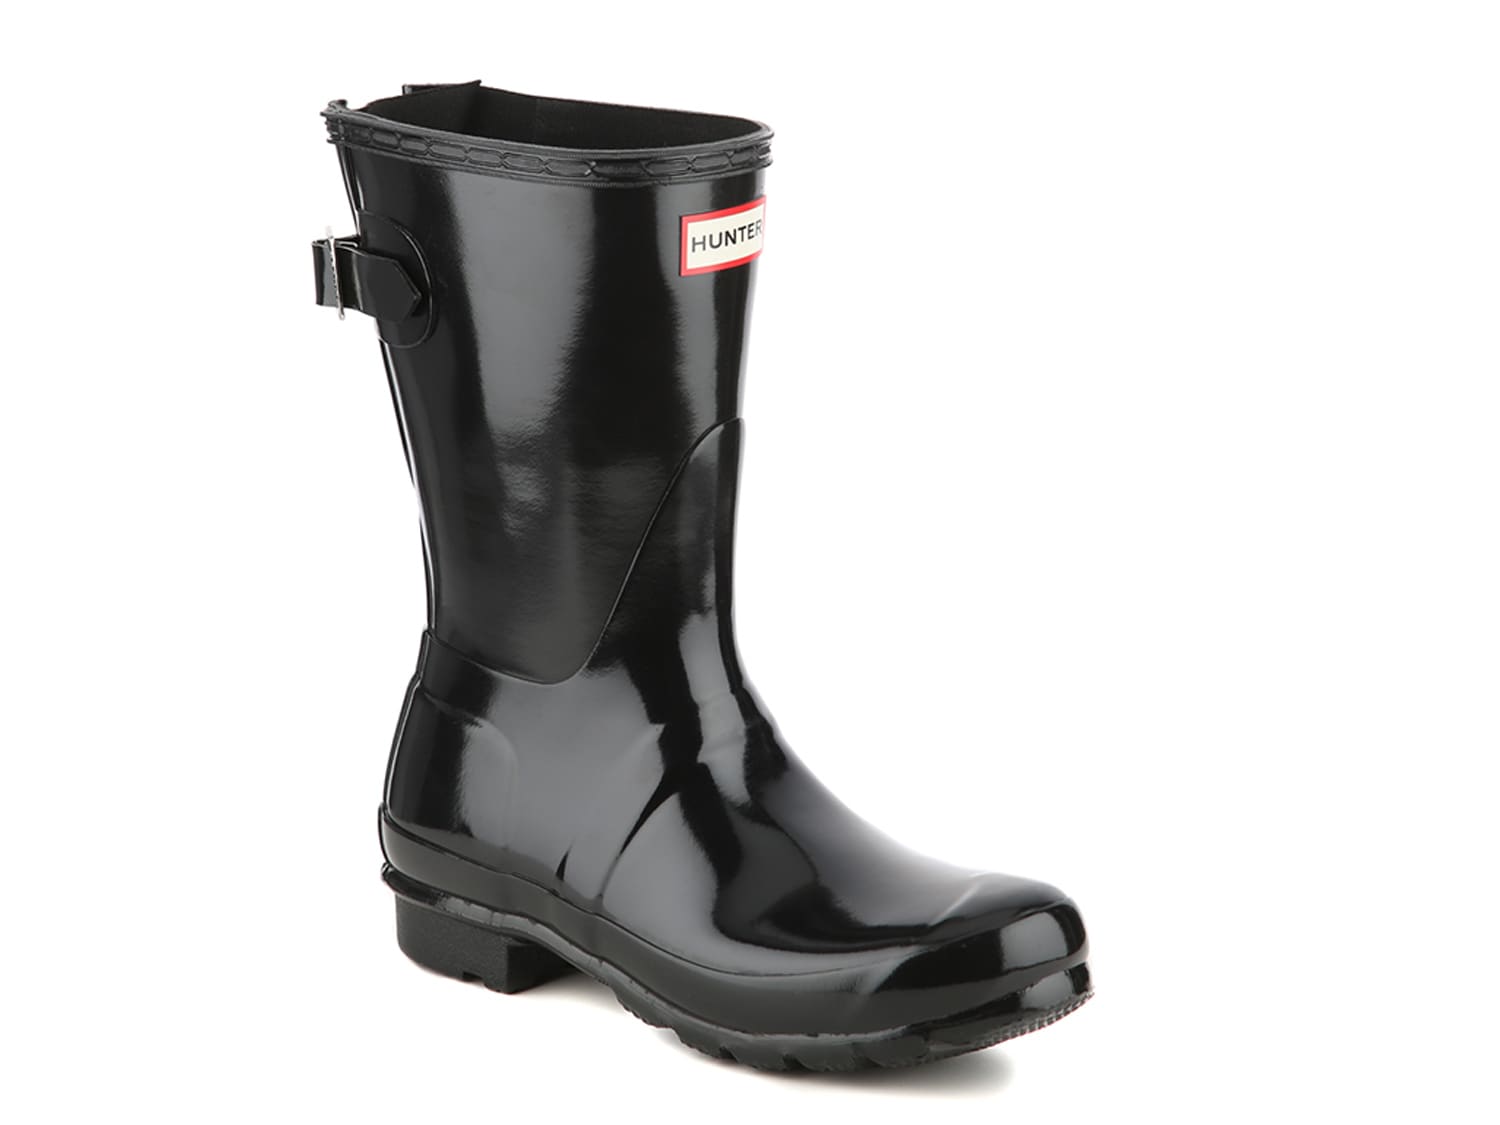 bata shoes safety boots